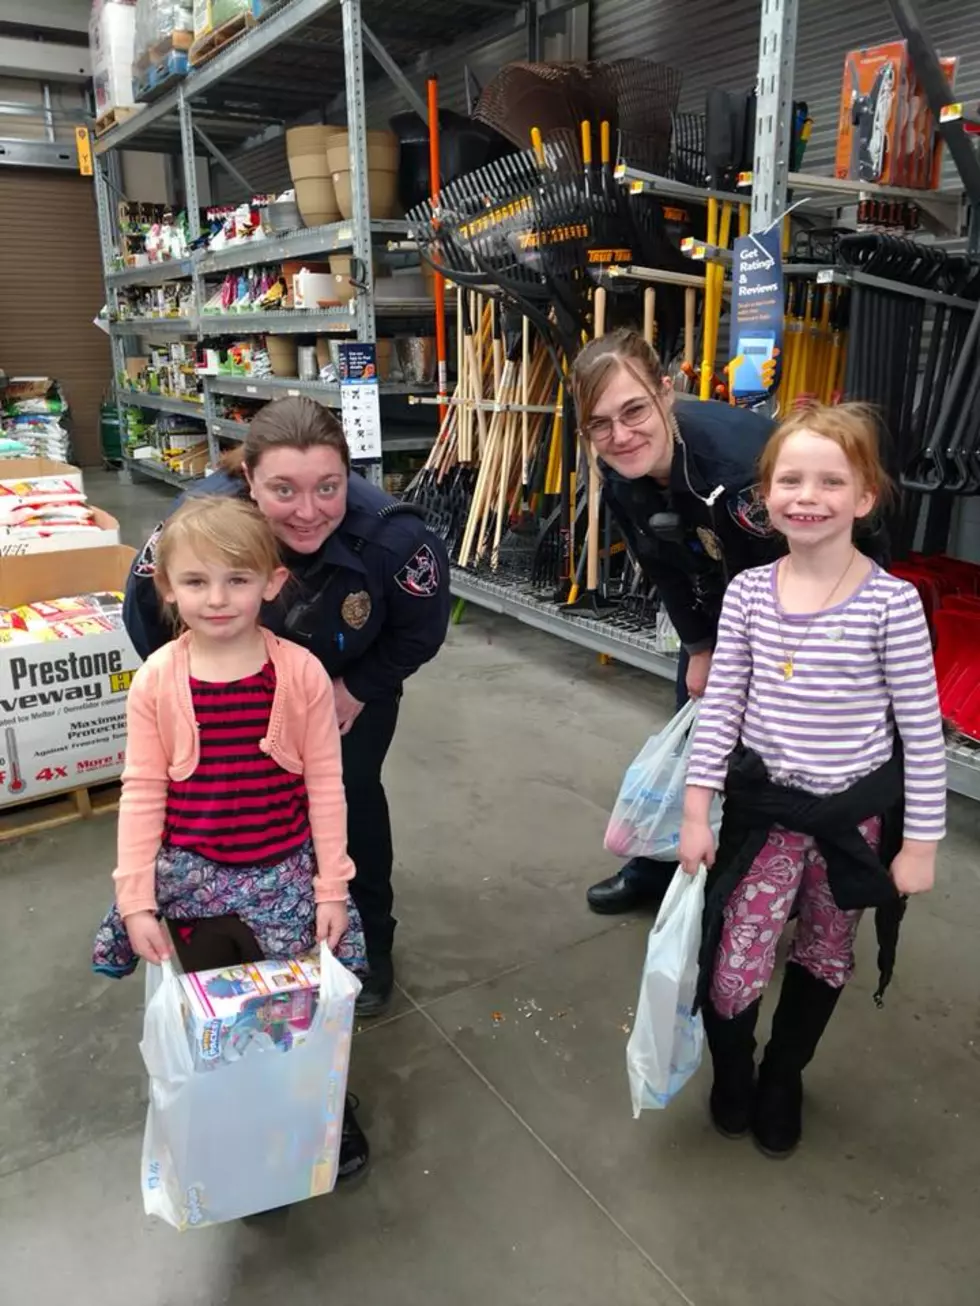 Local Casper Area Police Departments Team Up For Annual ‘Shop With A Cop’ Event